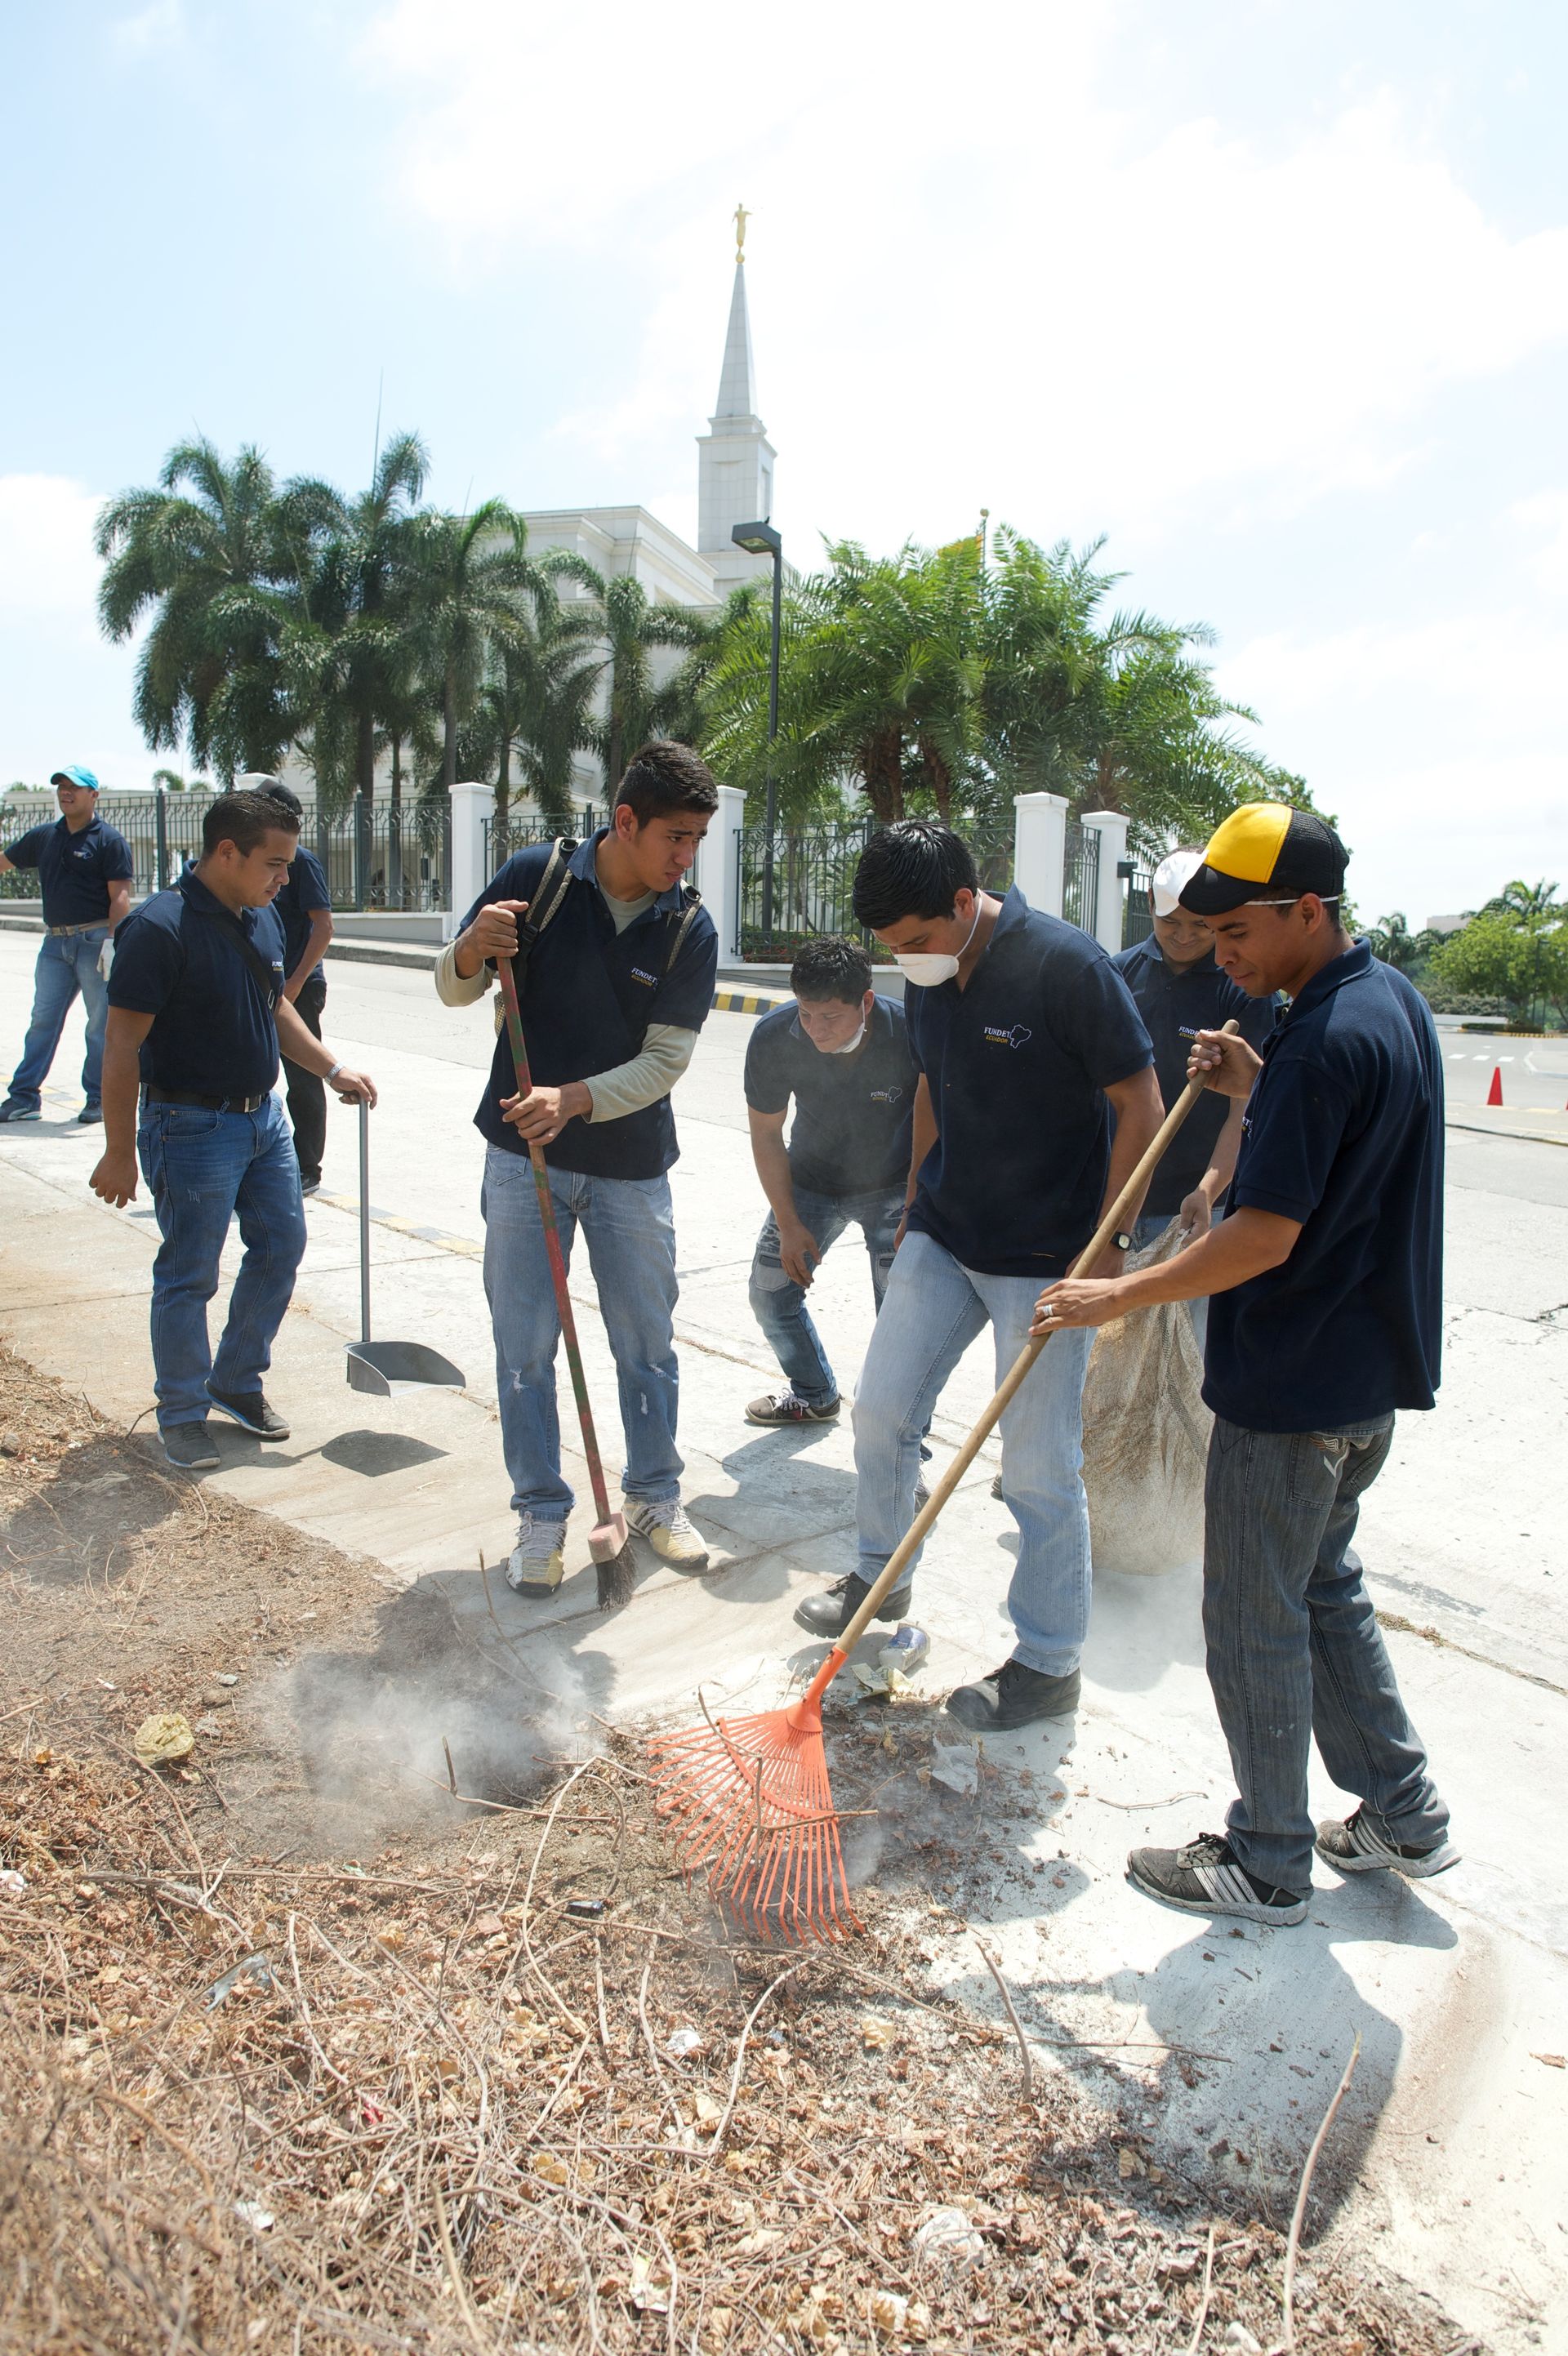 Men working outside the Guayaquil Ecuador Temple.